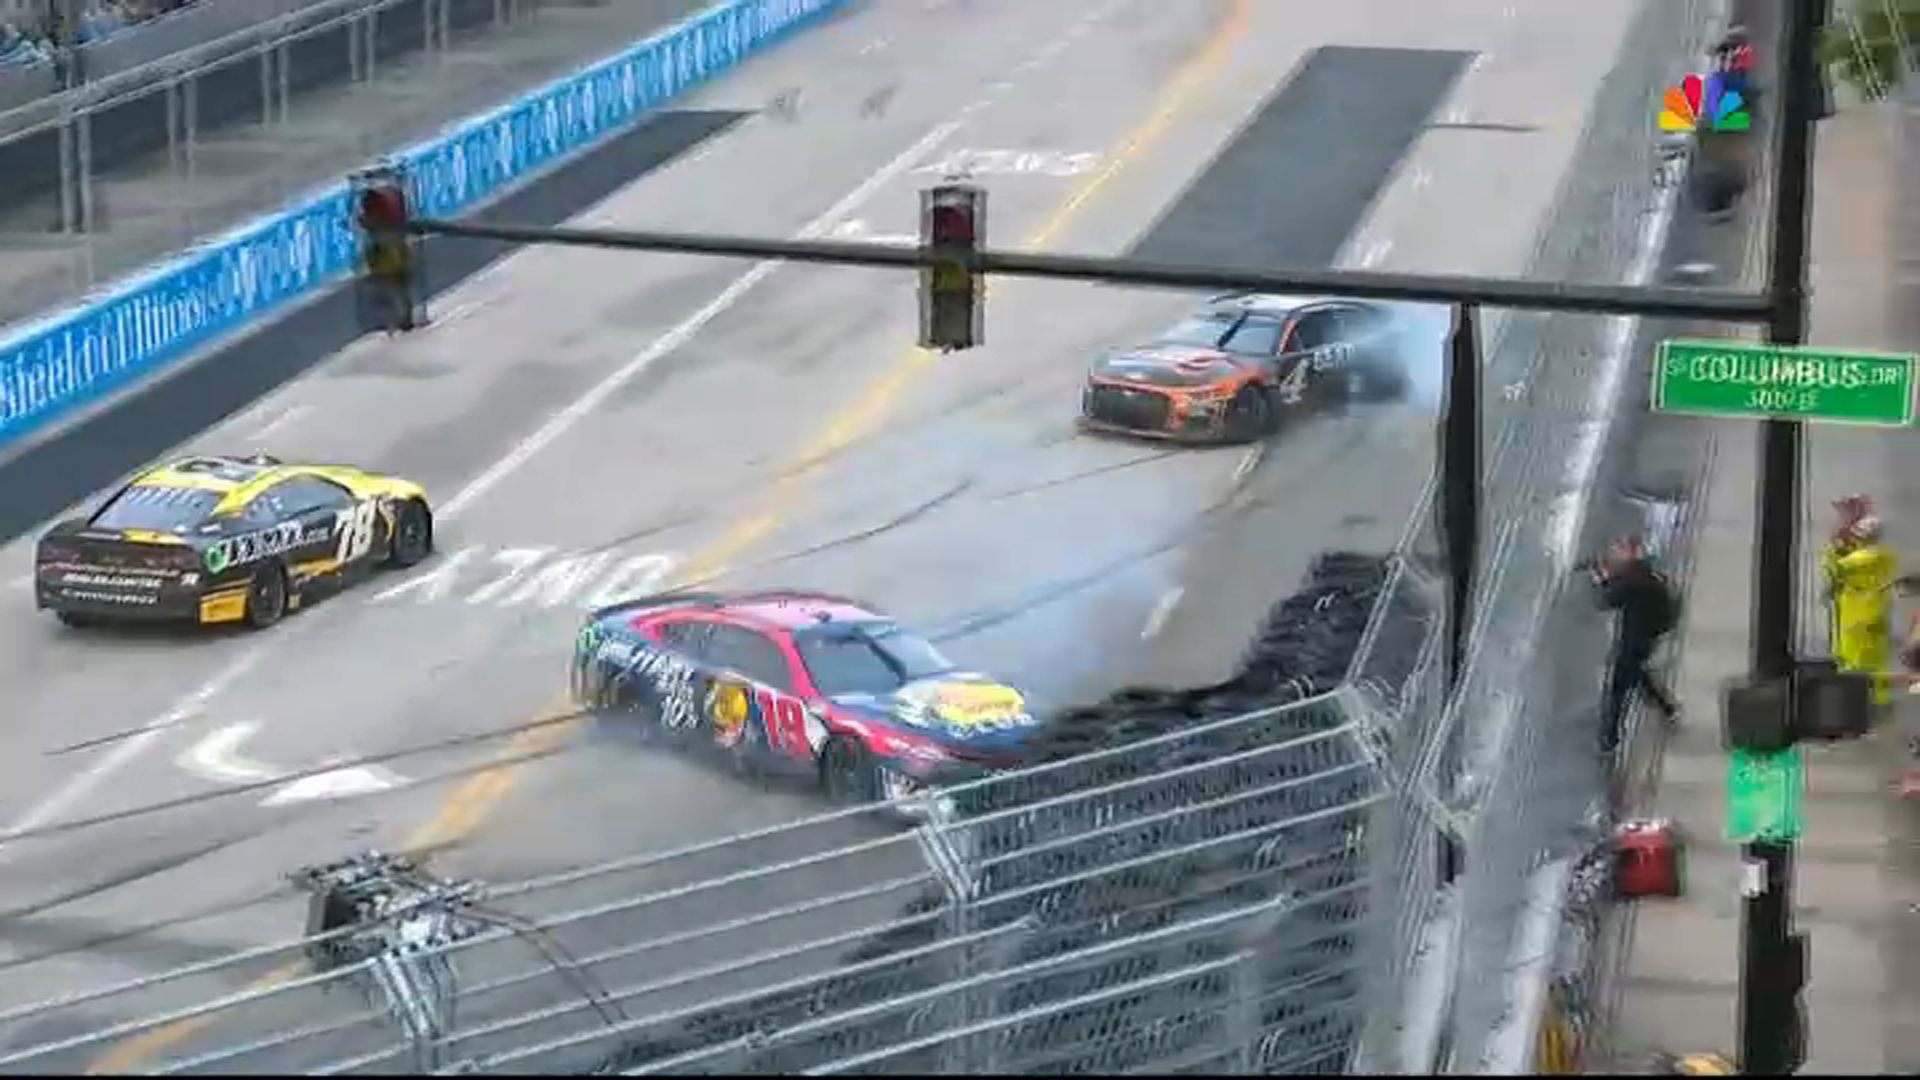 Watch all the crashes in the historic NASCAR Chicago Street Race